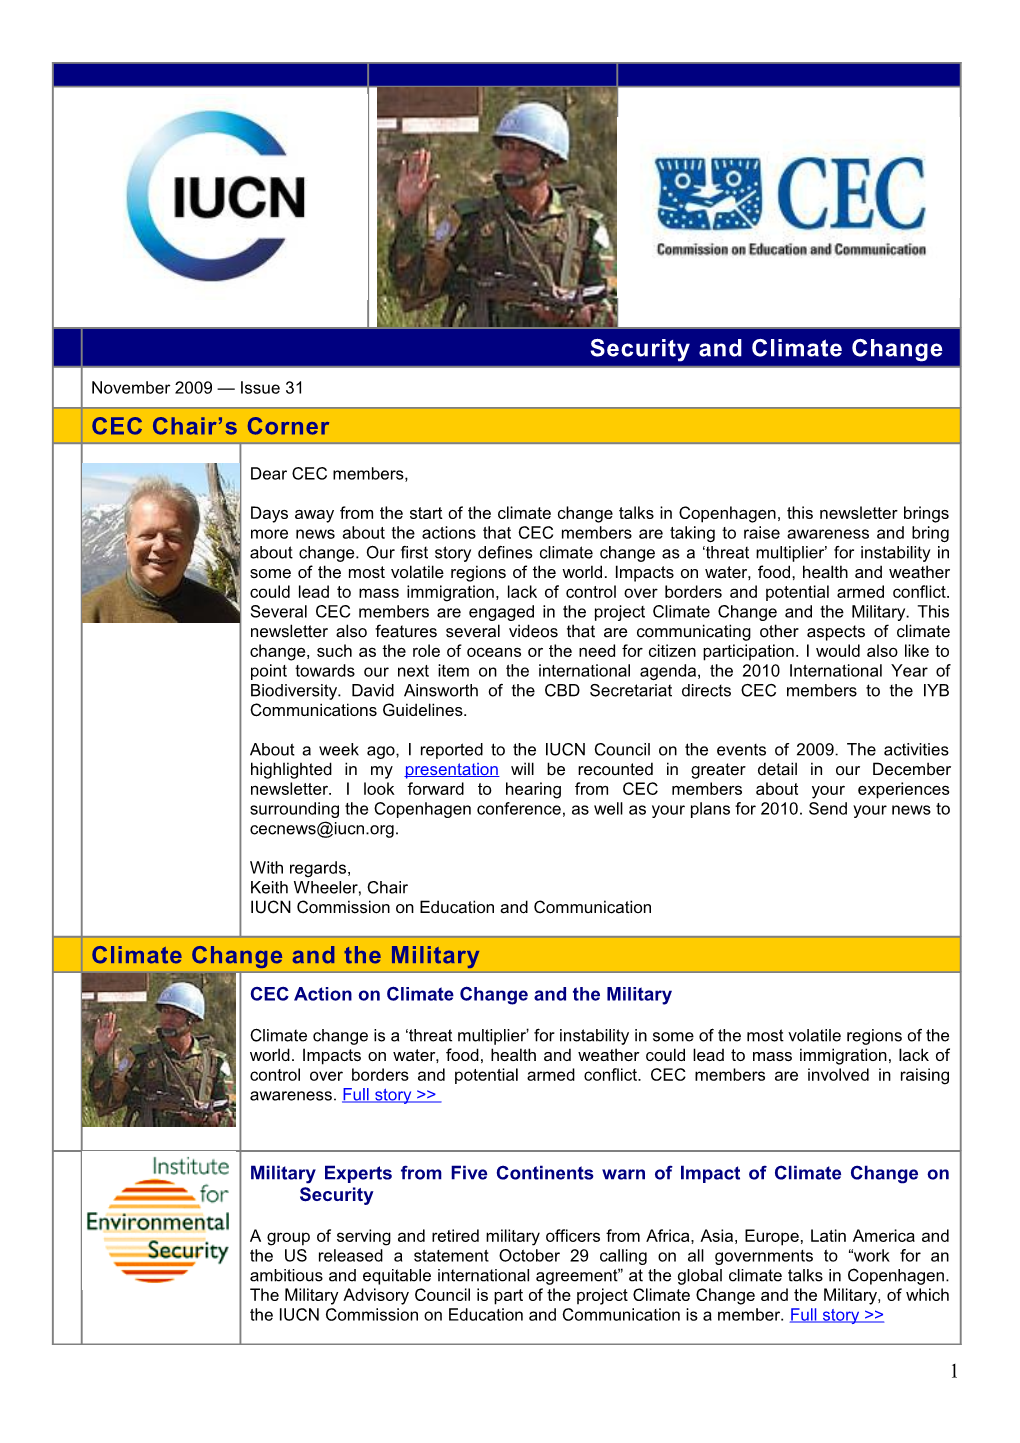 CEC Action on Climate Change and the Military